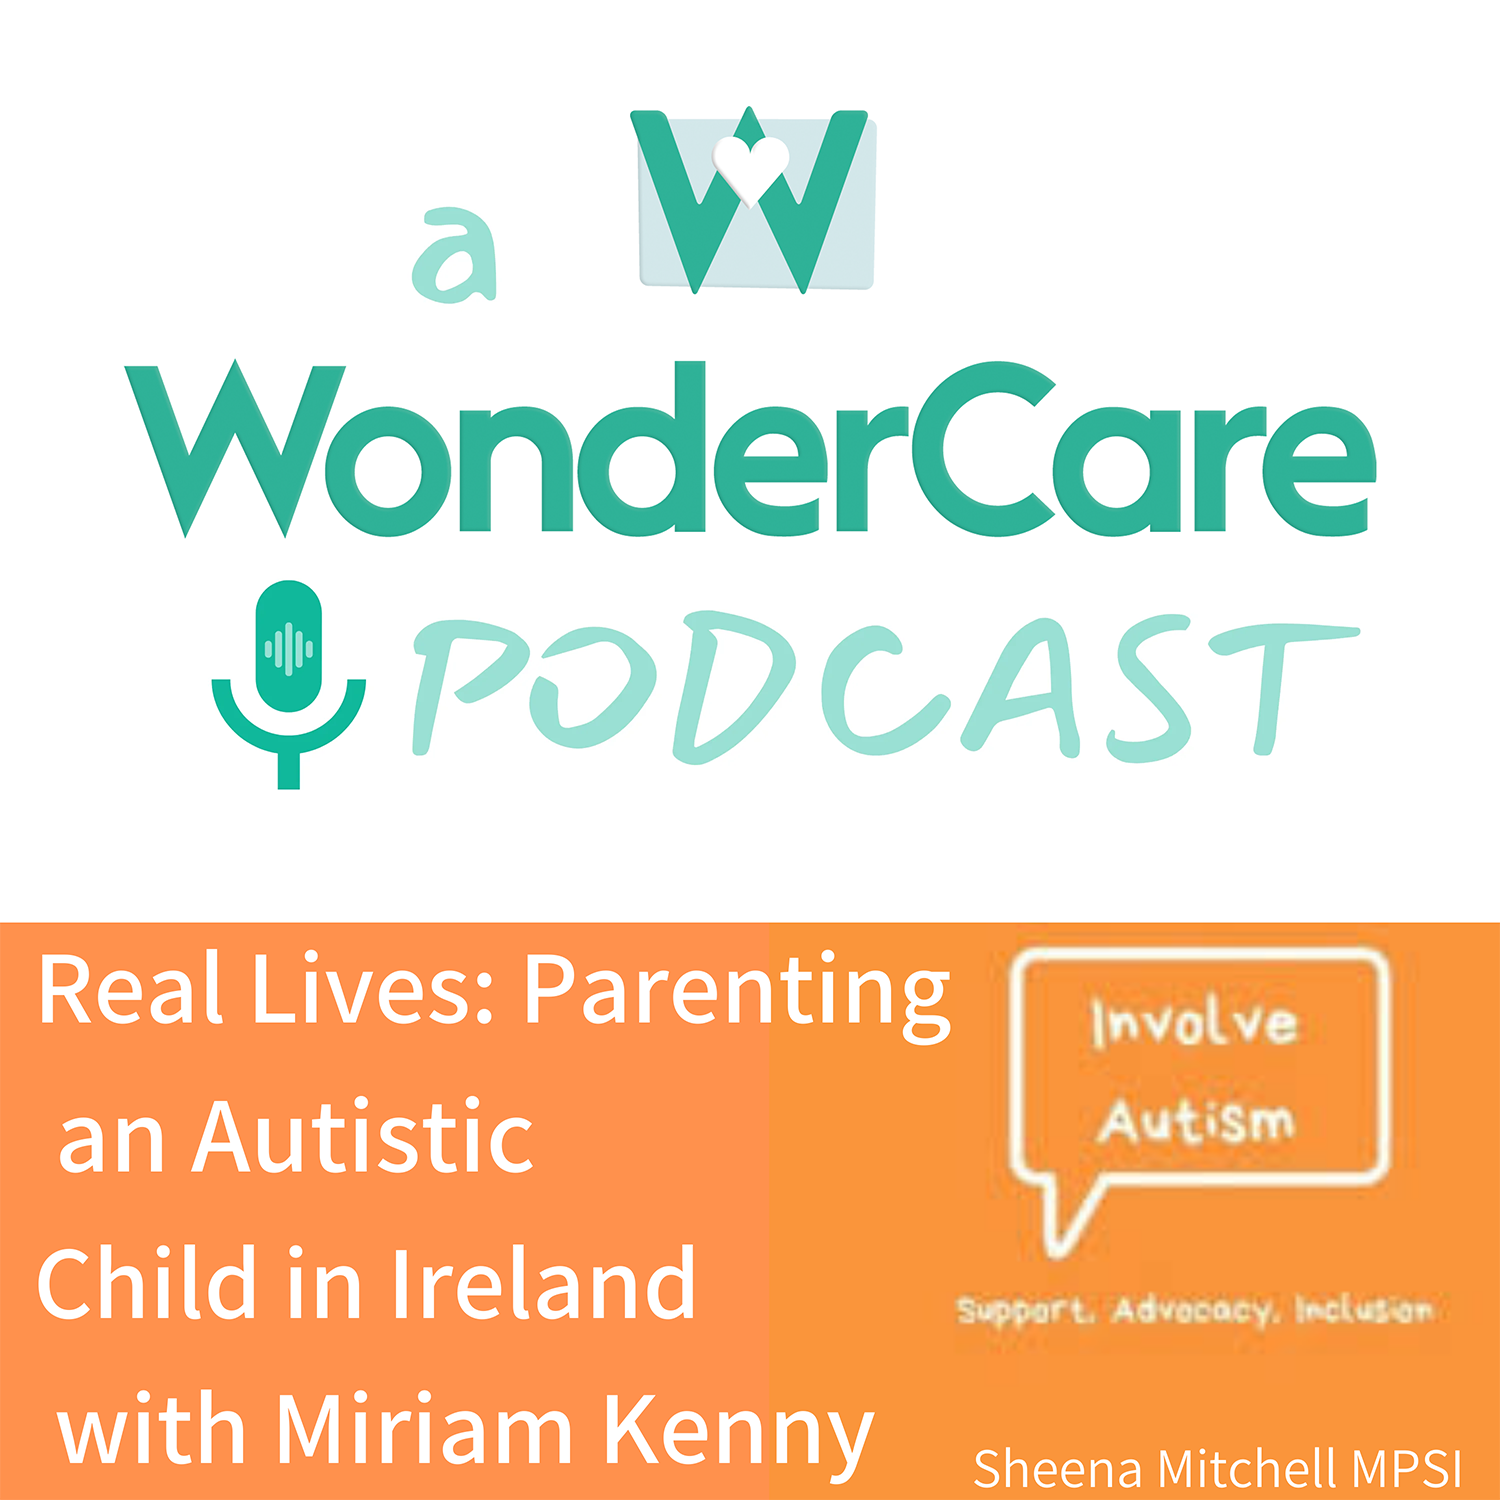 Real Lives: Parenting an Autistic Child in Ireland with Miriam Kenny